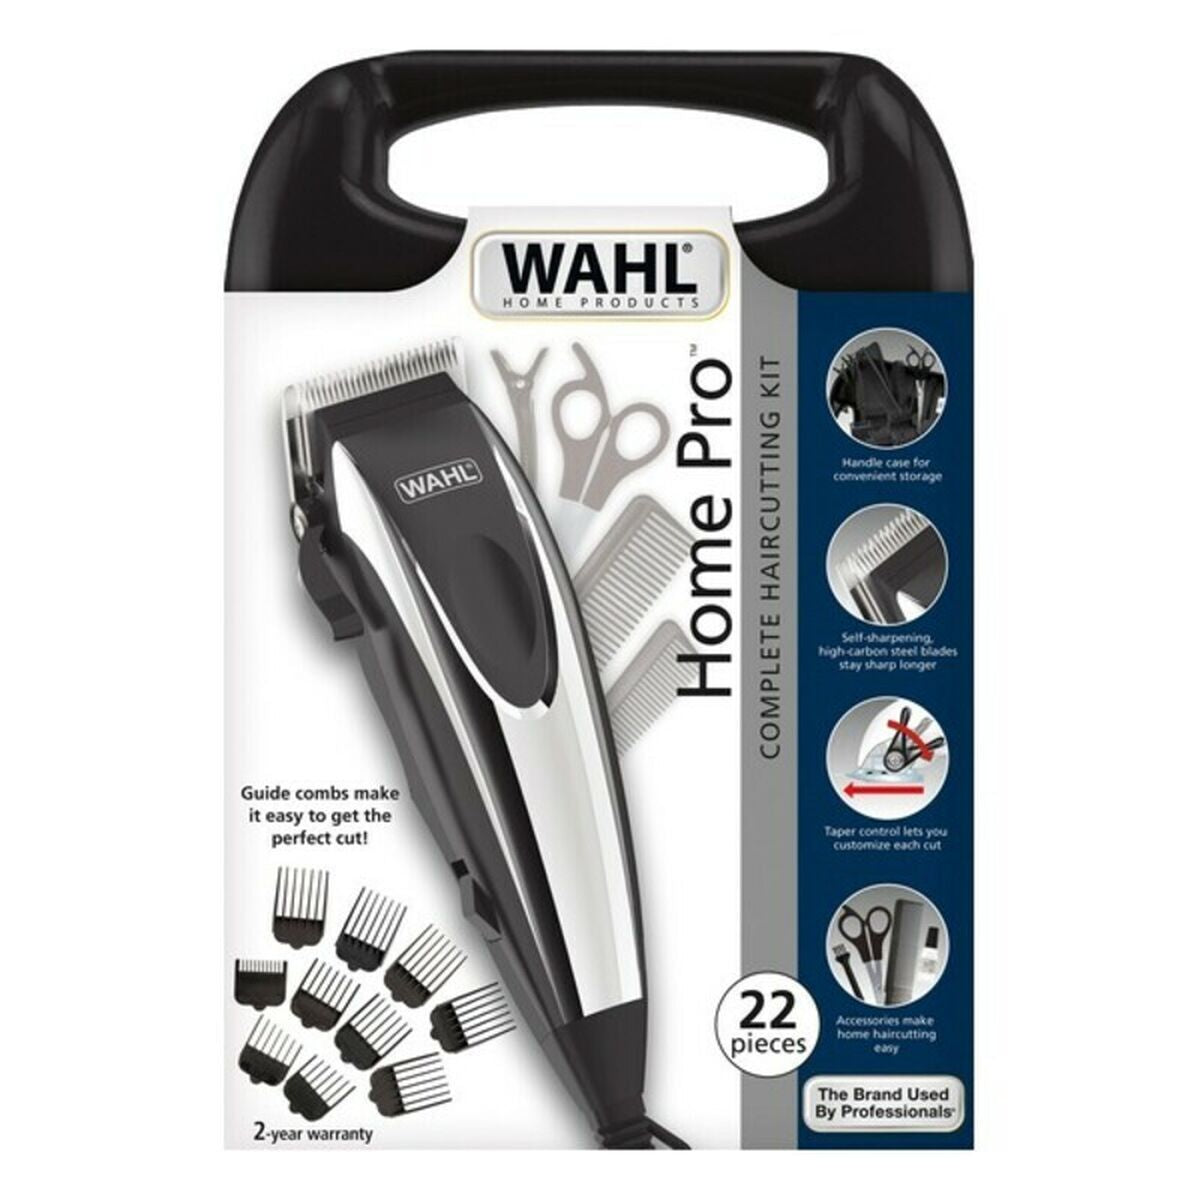 Hair Clippers Wahl Home Pro 0,3 mm